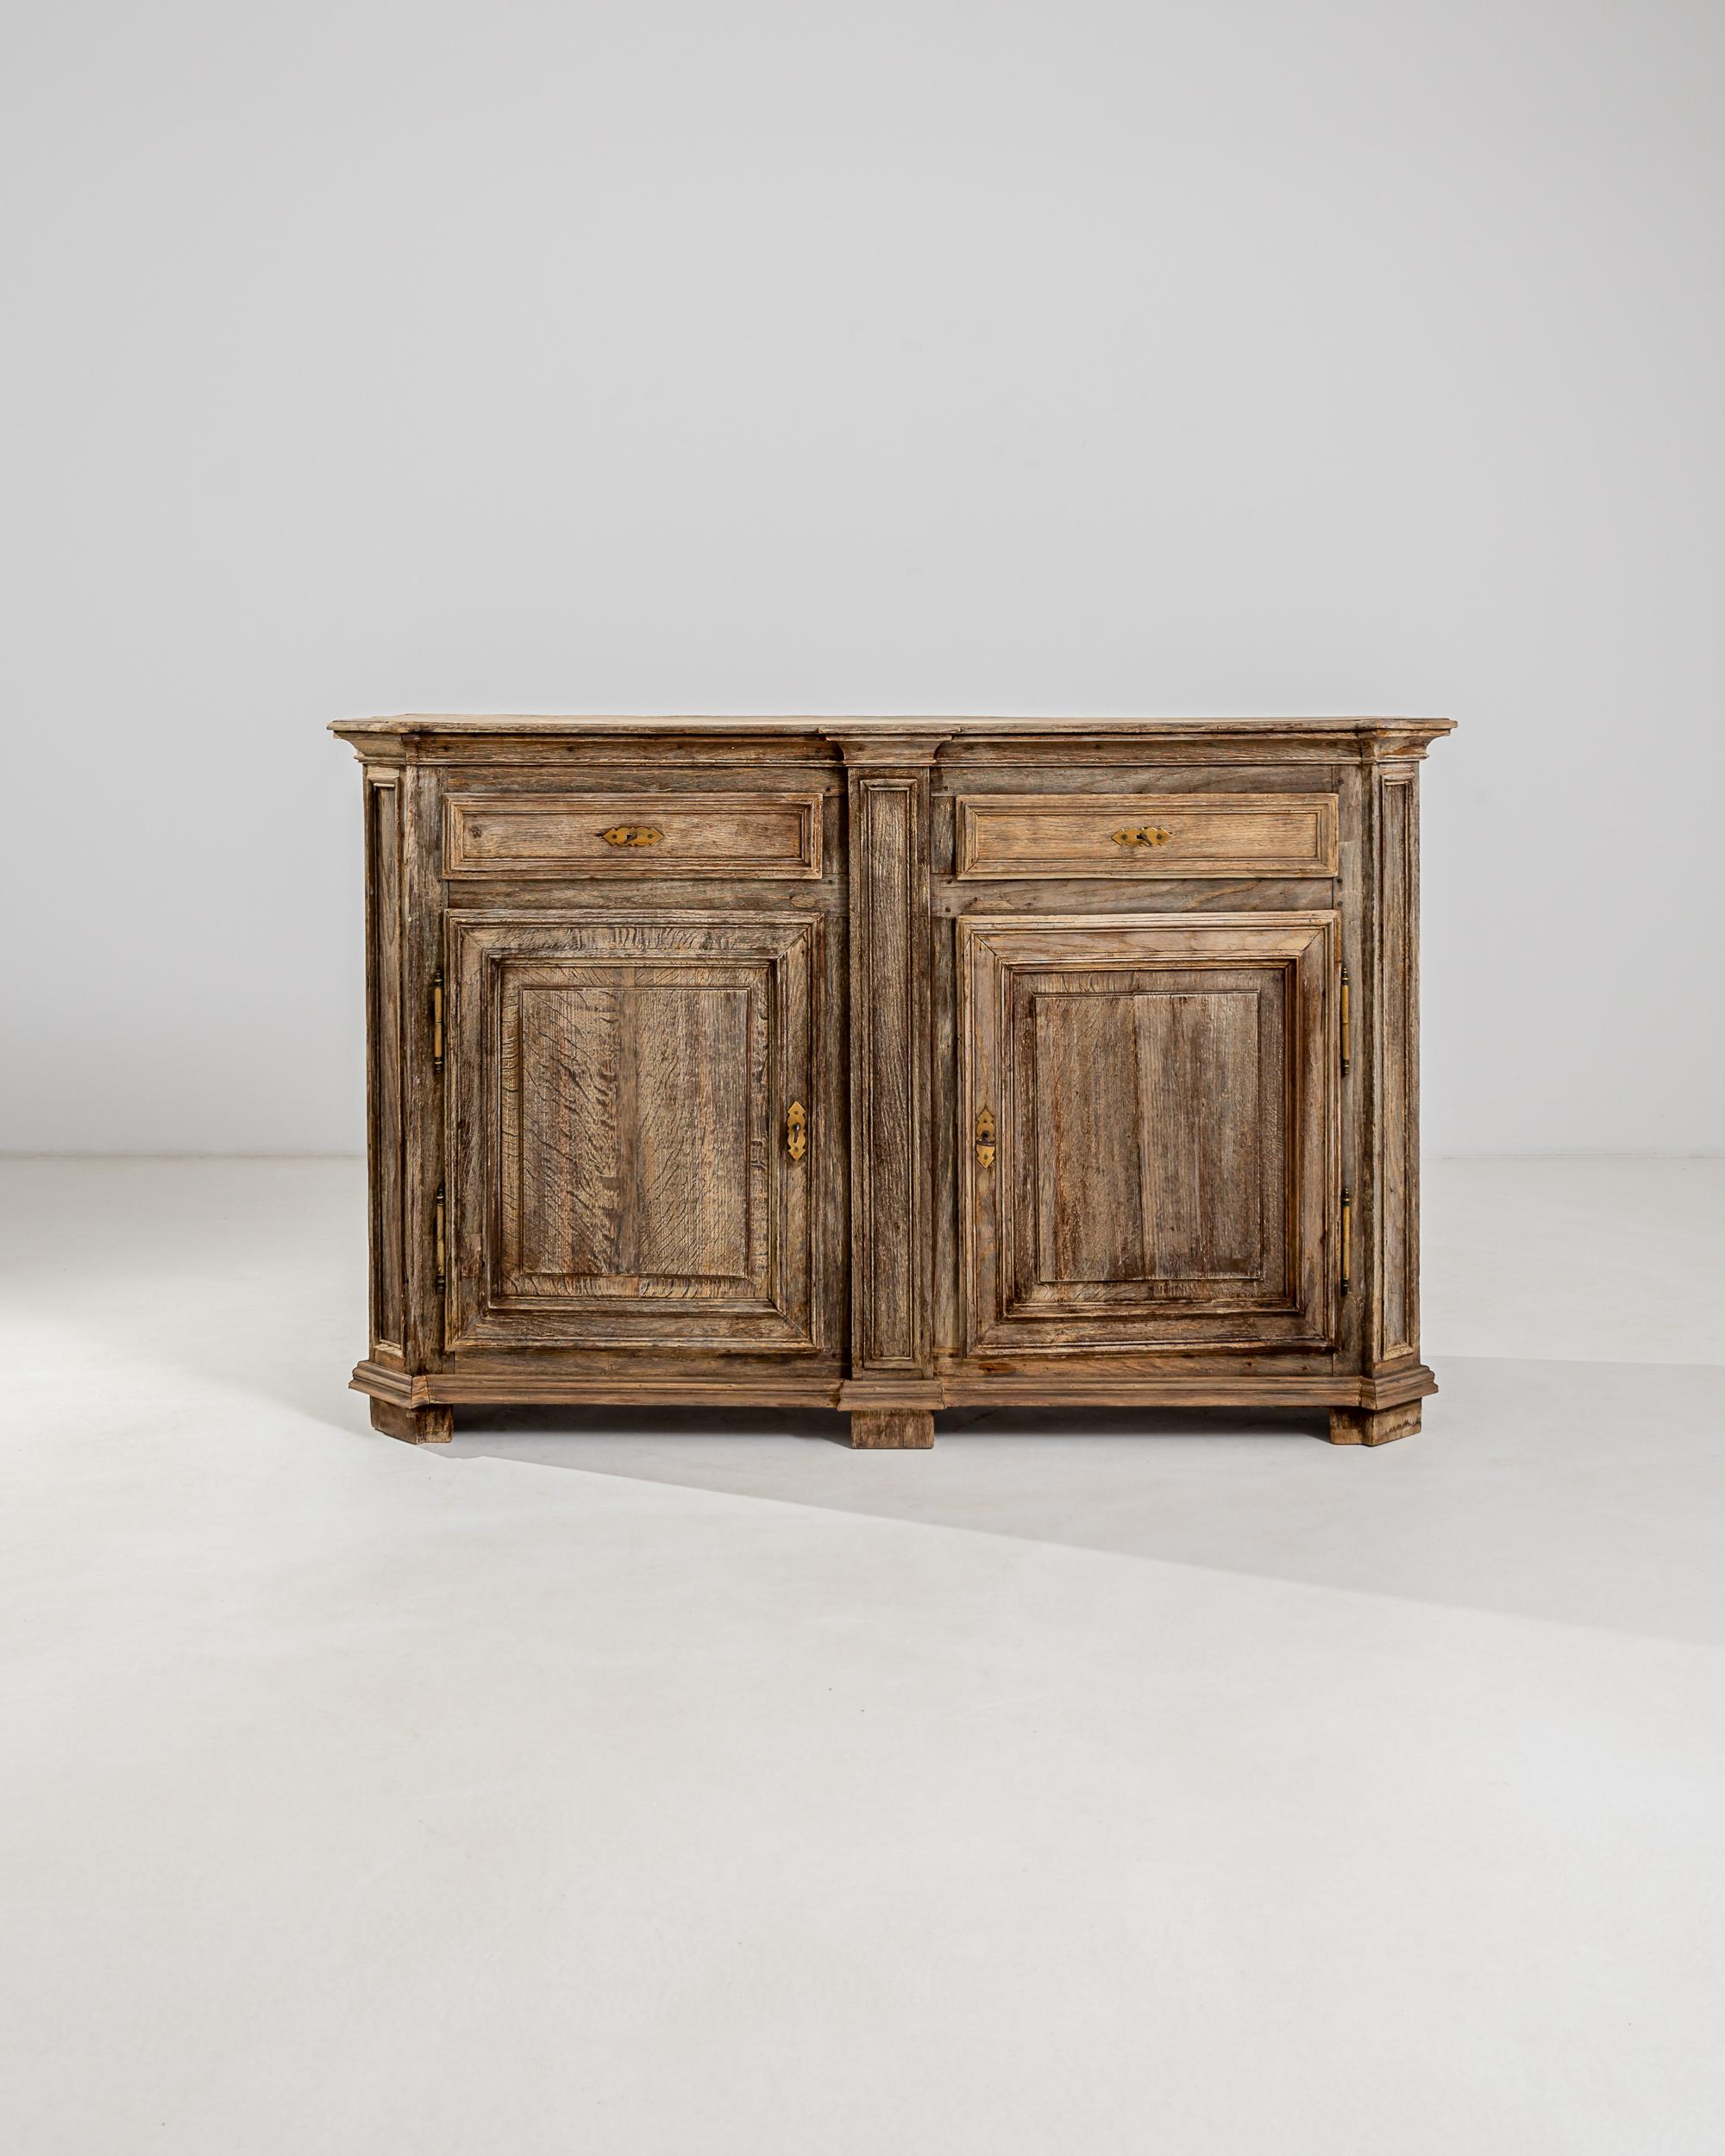 This provincial buffet strikes the perfect balance between rusticity and refinement. Made in Belgium in the 19th century, the organic finish of the carefully restored oak brings a vigorous air to this antique piece. Faceted corners and a handsome